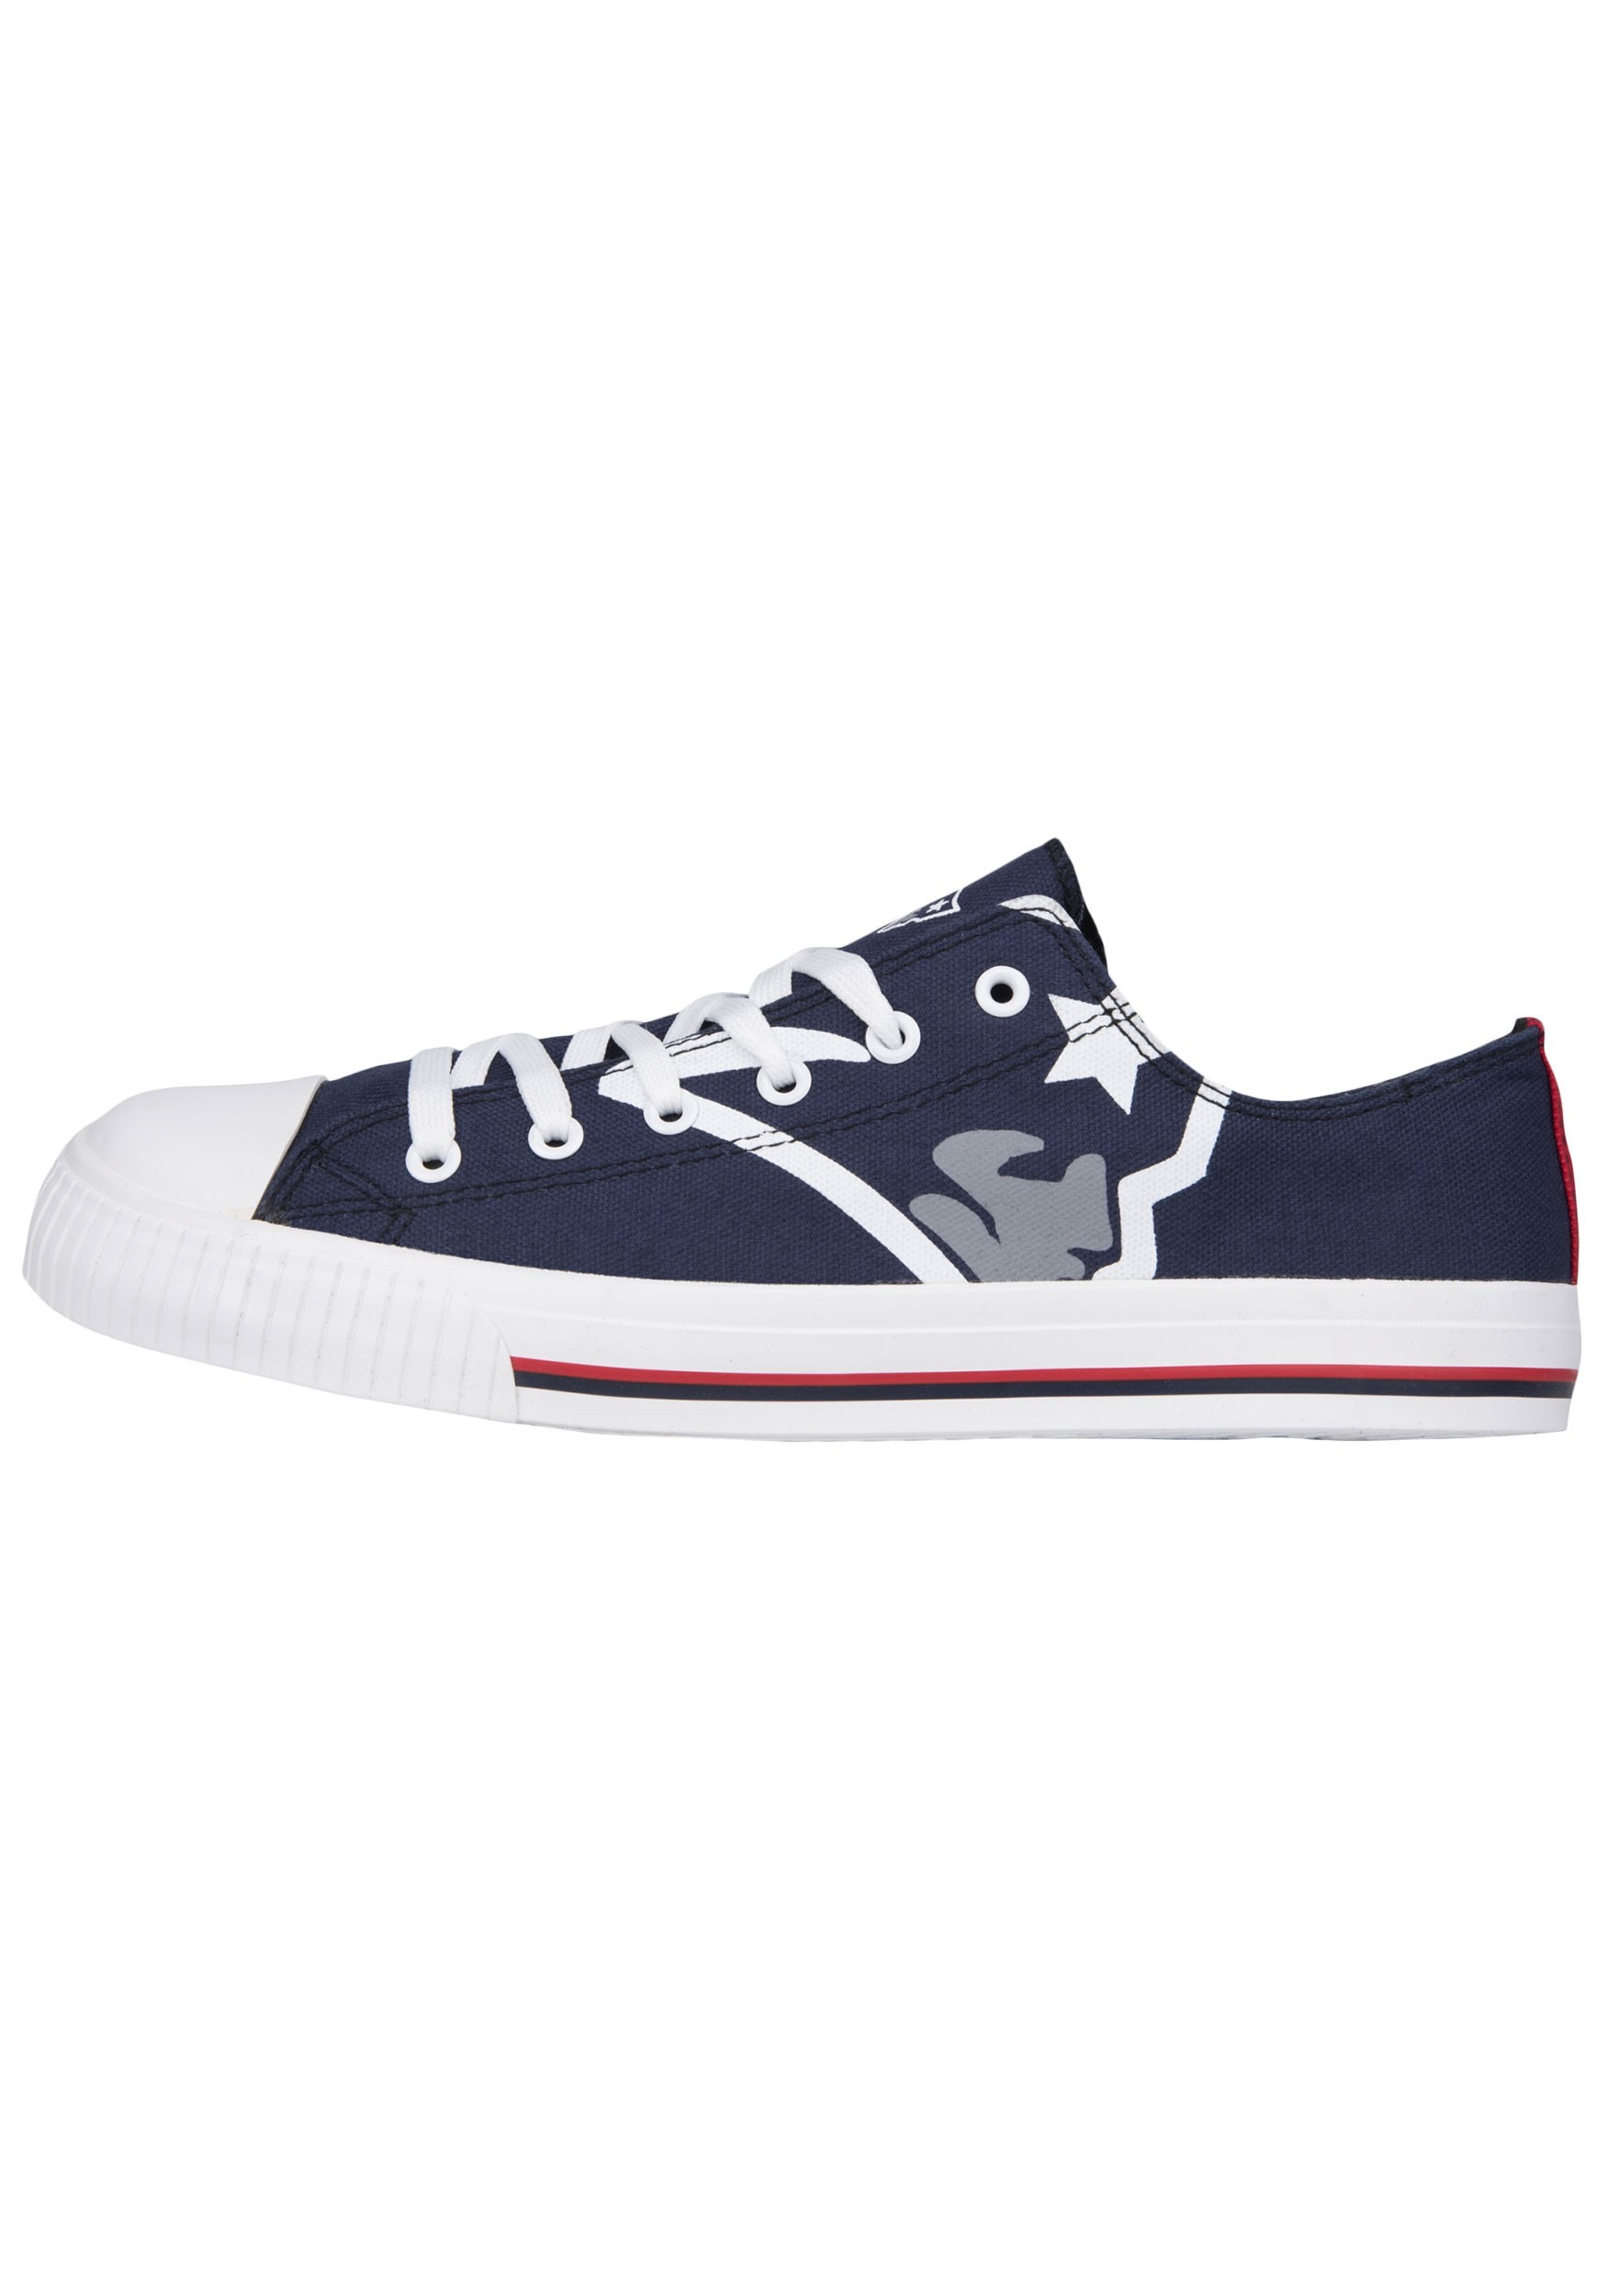 Youth NFL Patriots Low Top Canvas Shoe